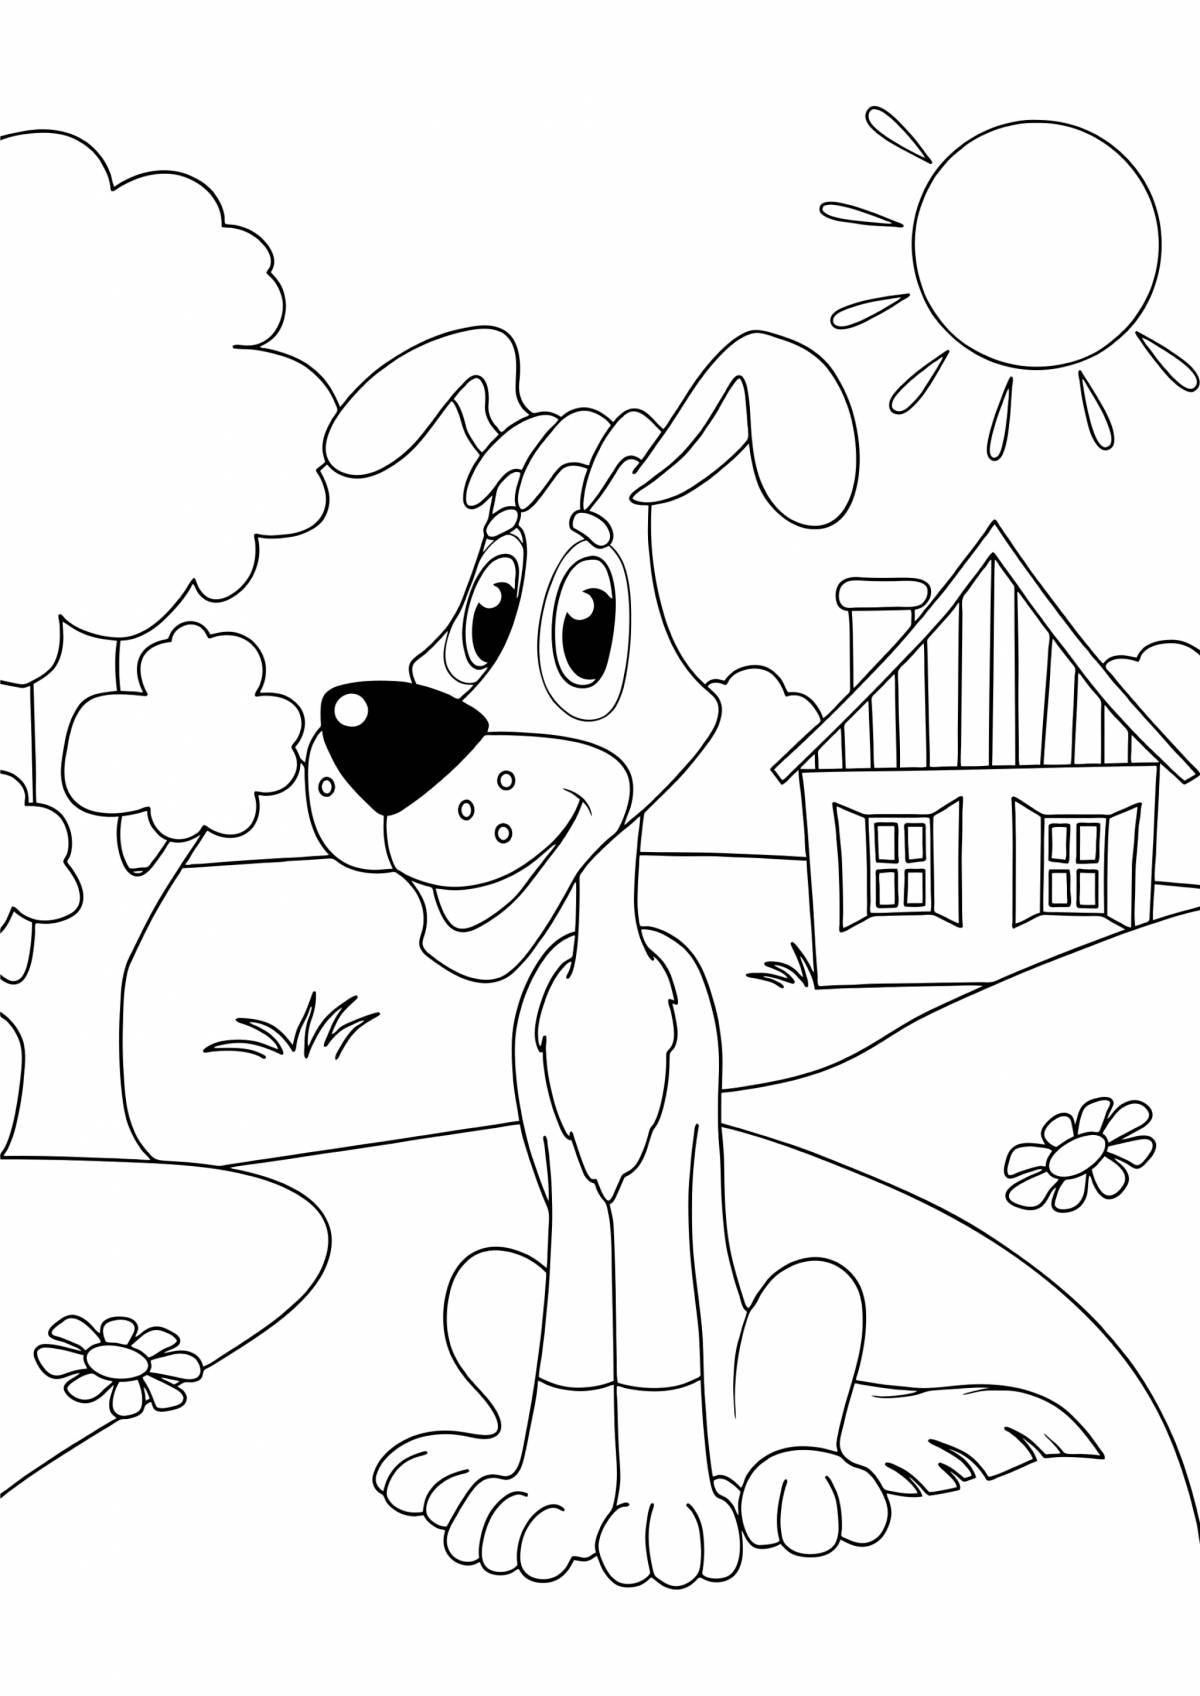 Adorable buttermilk coloring book for kids